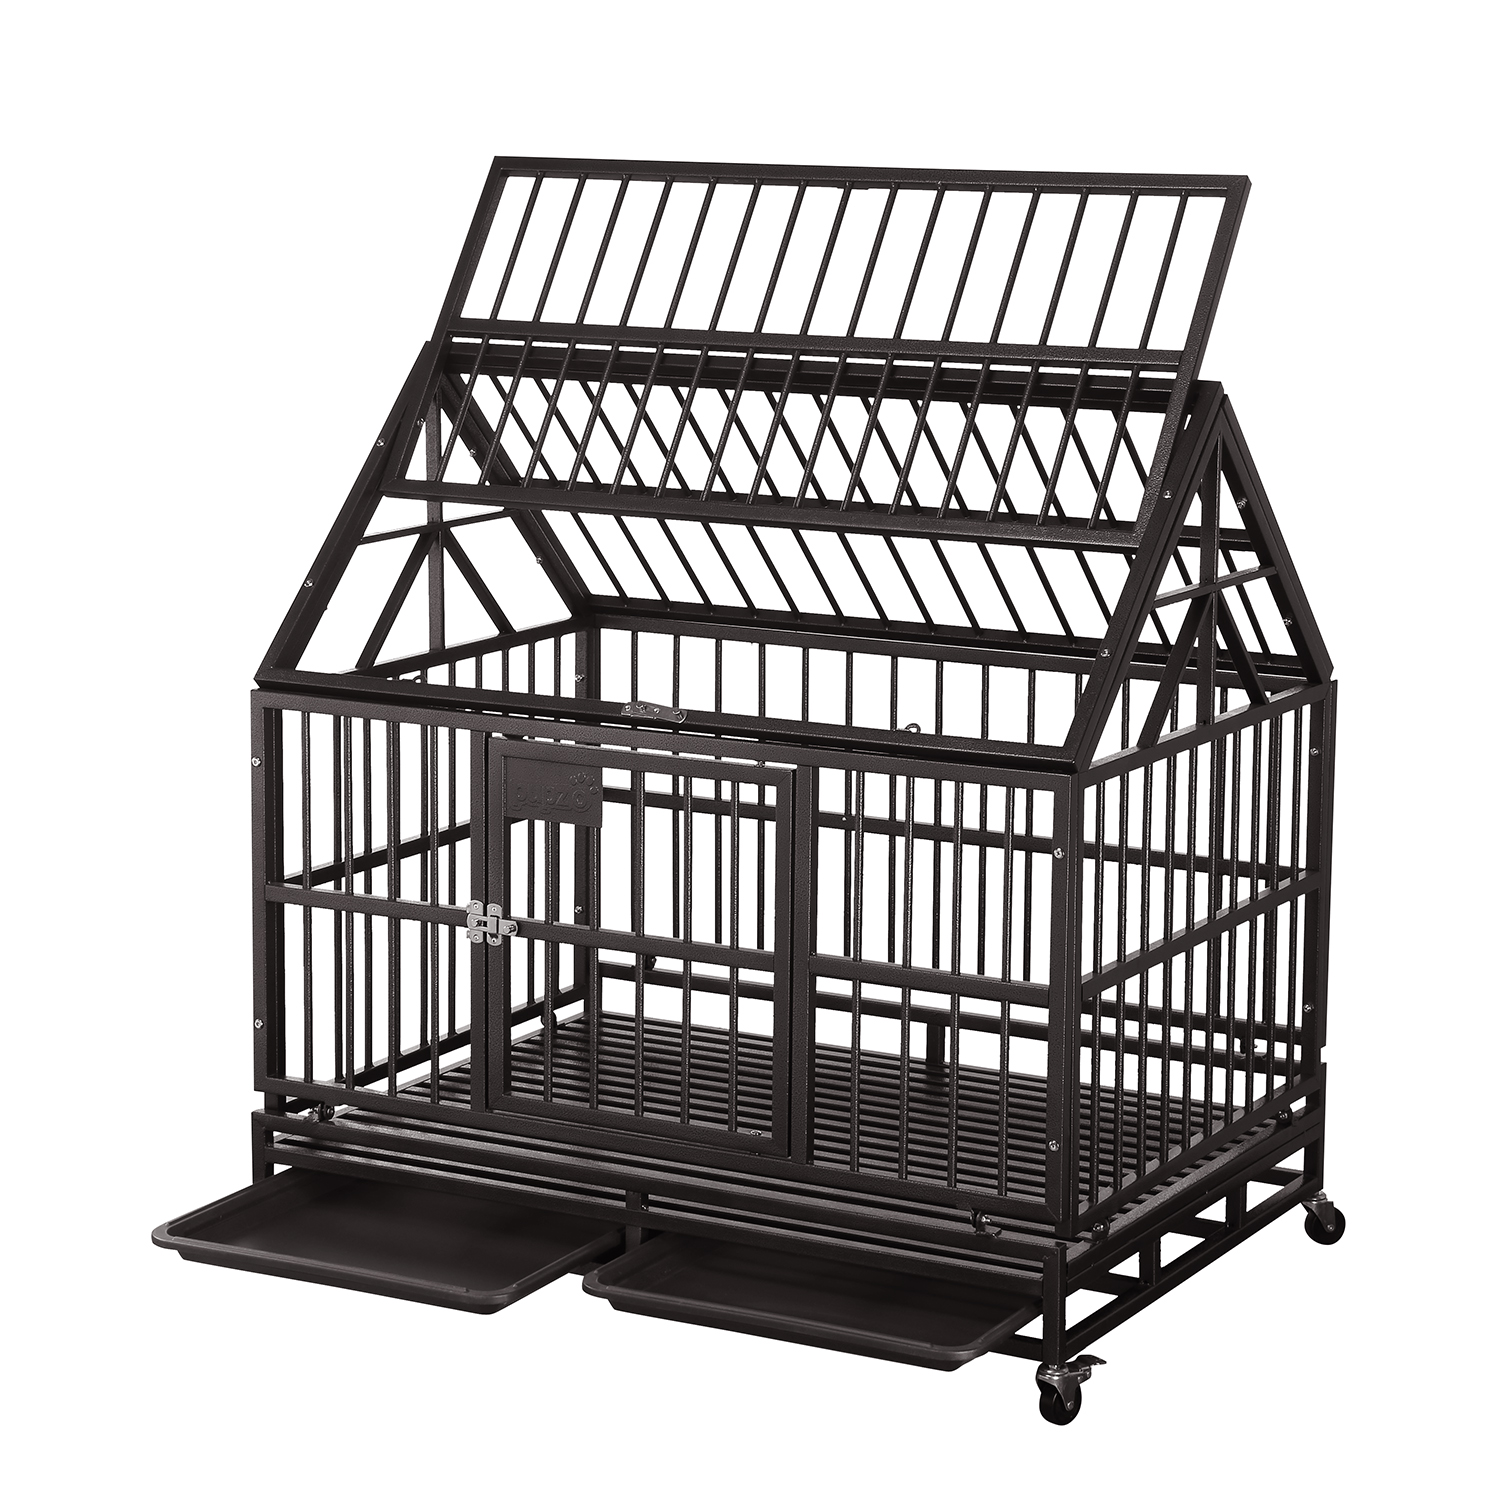 38 inch Dog Cage $70 + Free Shipping